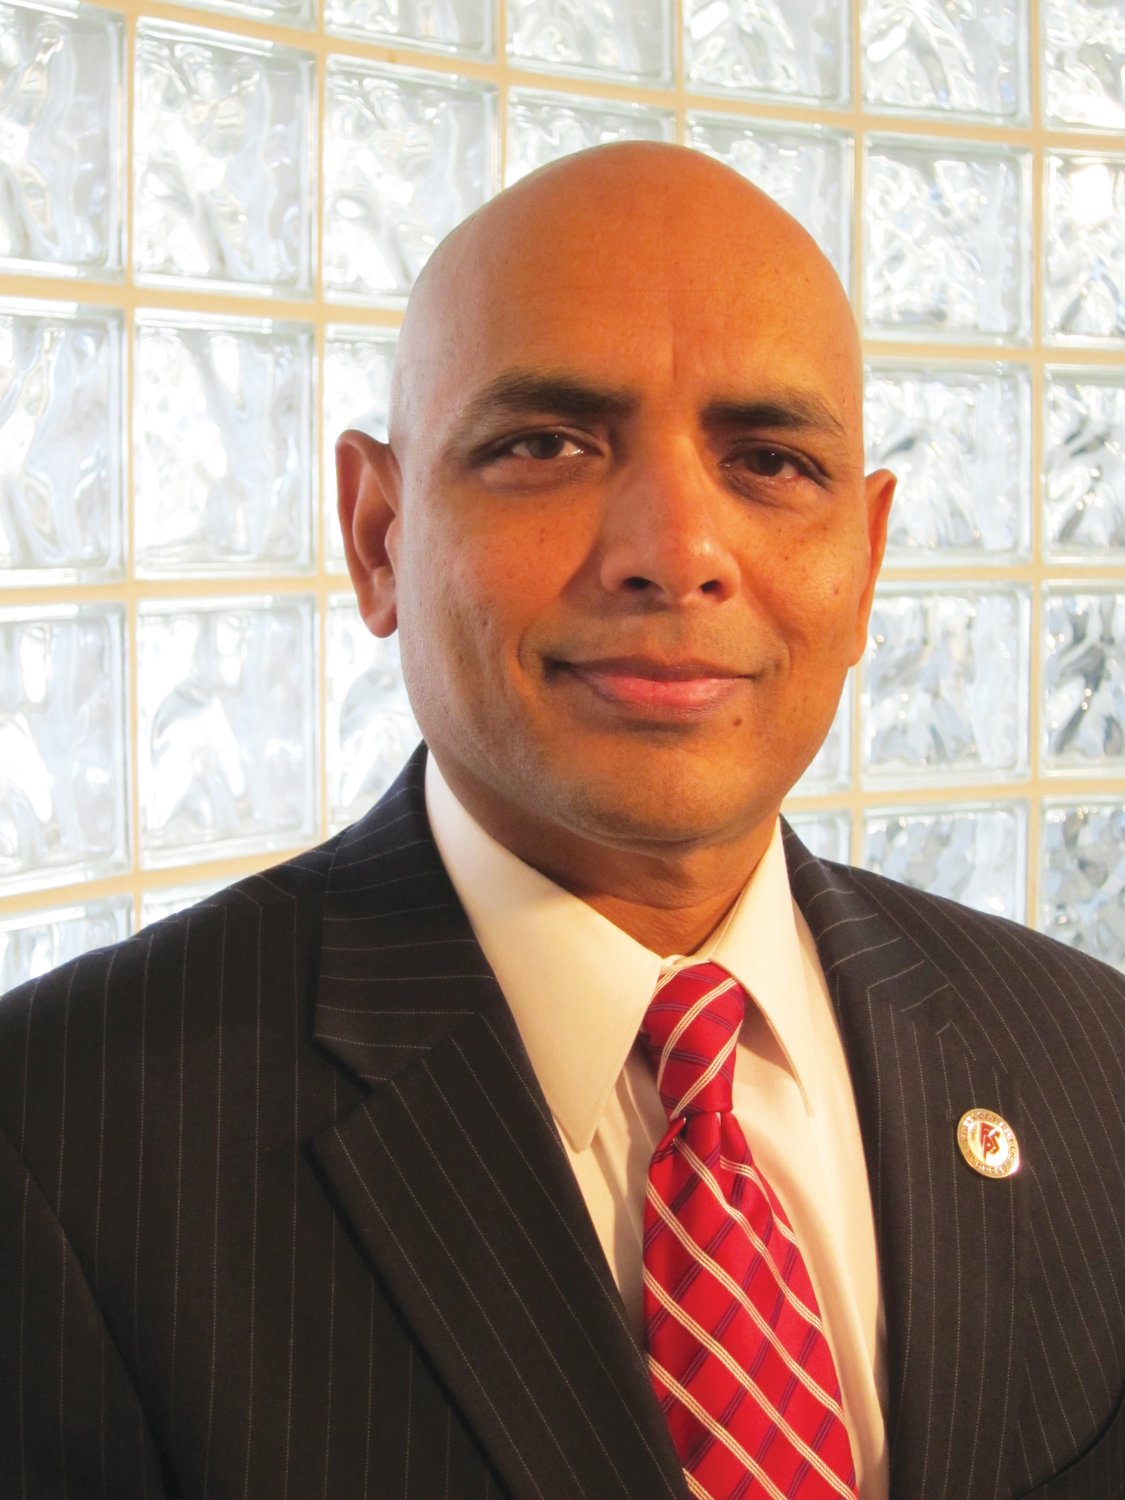 Superintendent of Freeport Public Schools Kishore Kuncham has been named the Freeport Herald’s Person of the Year.